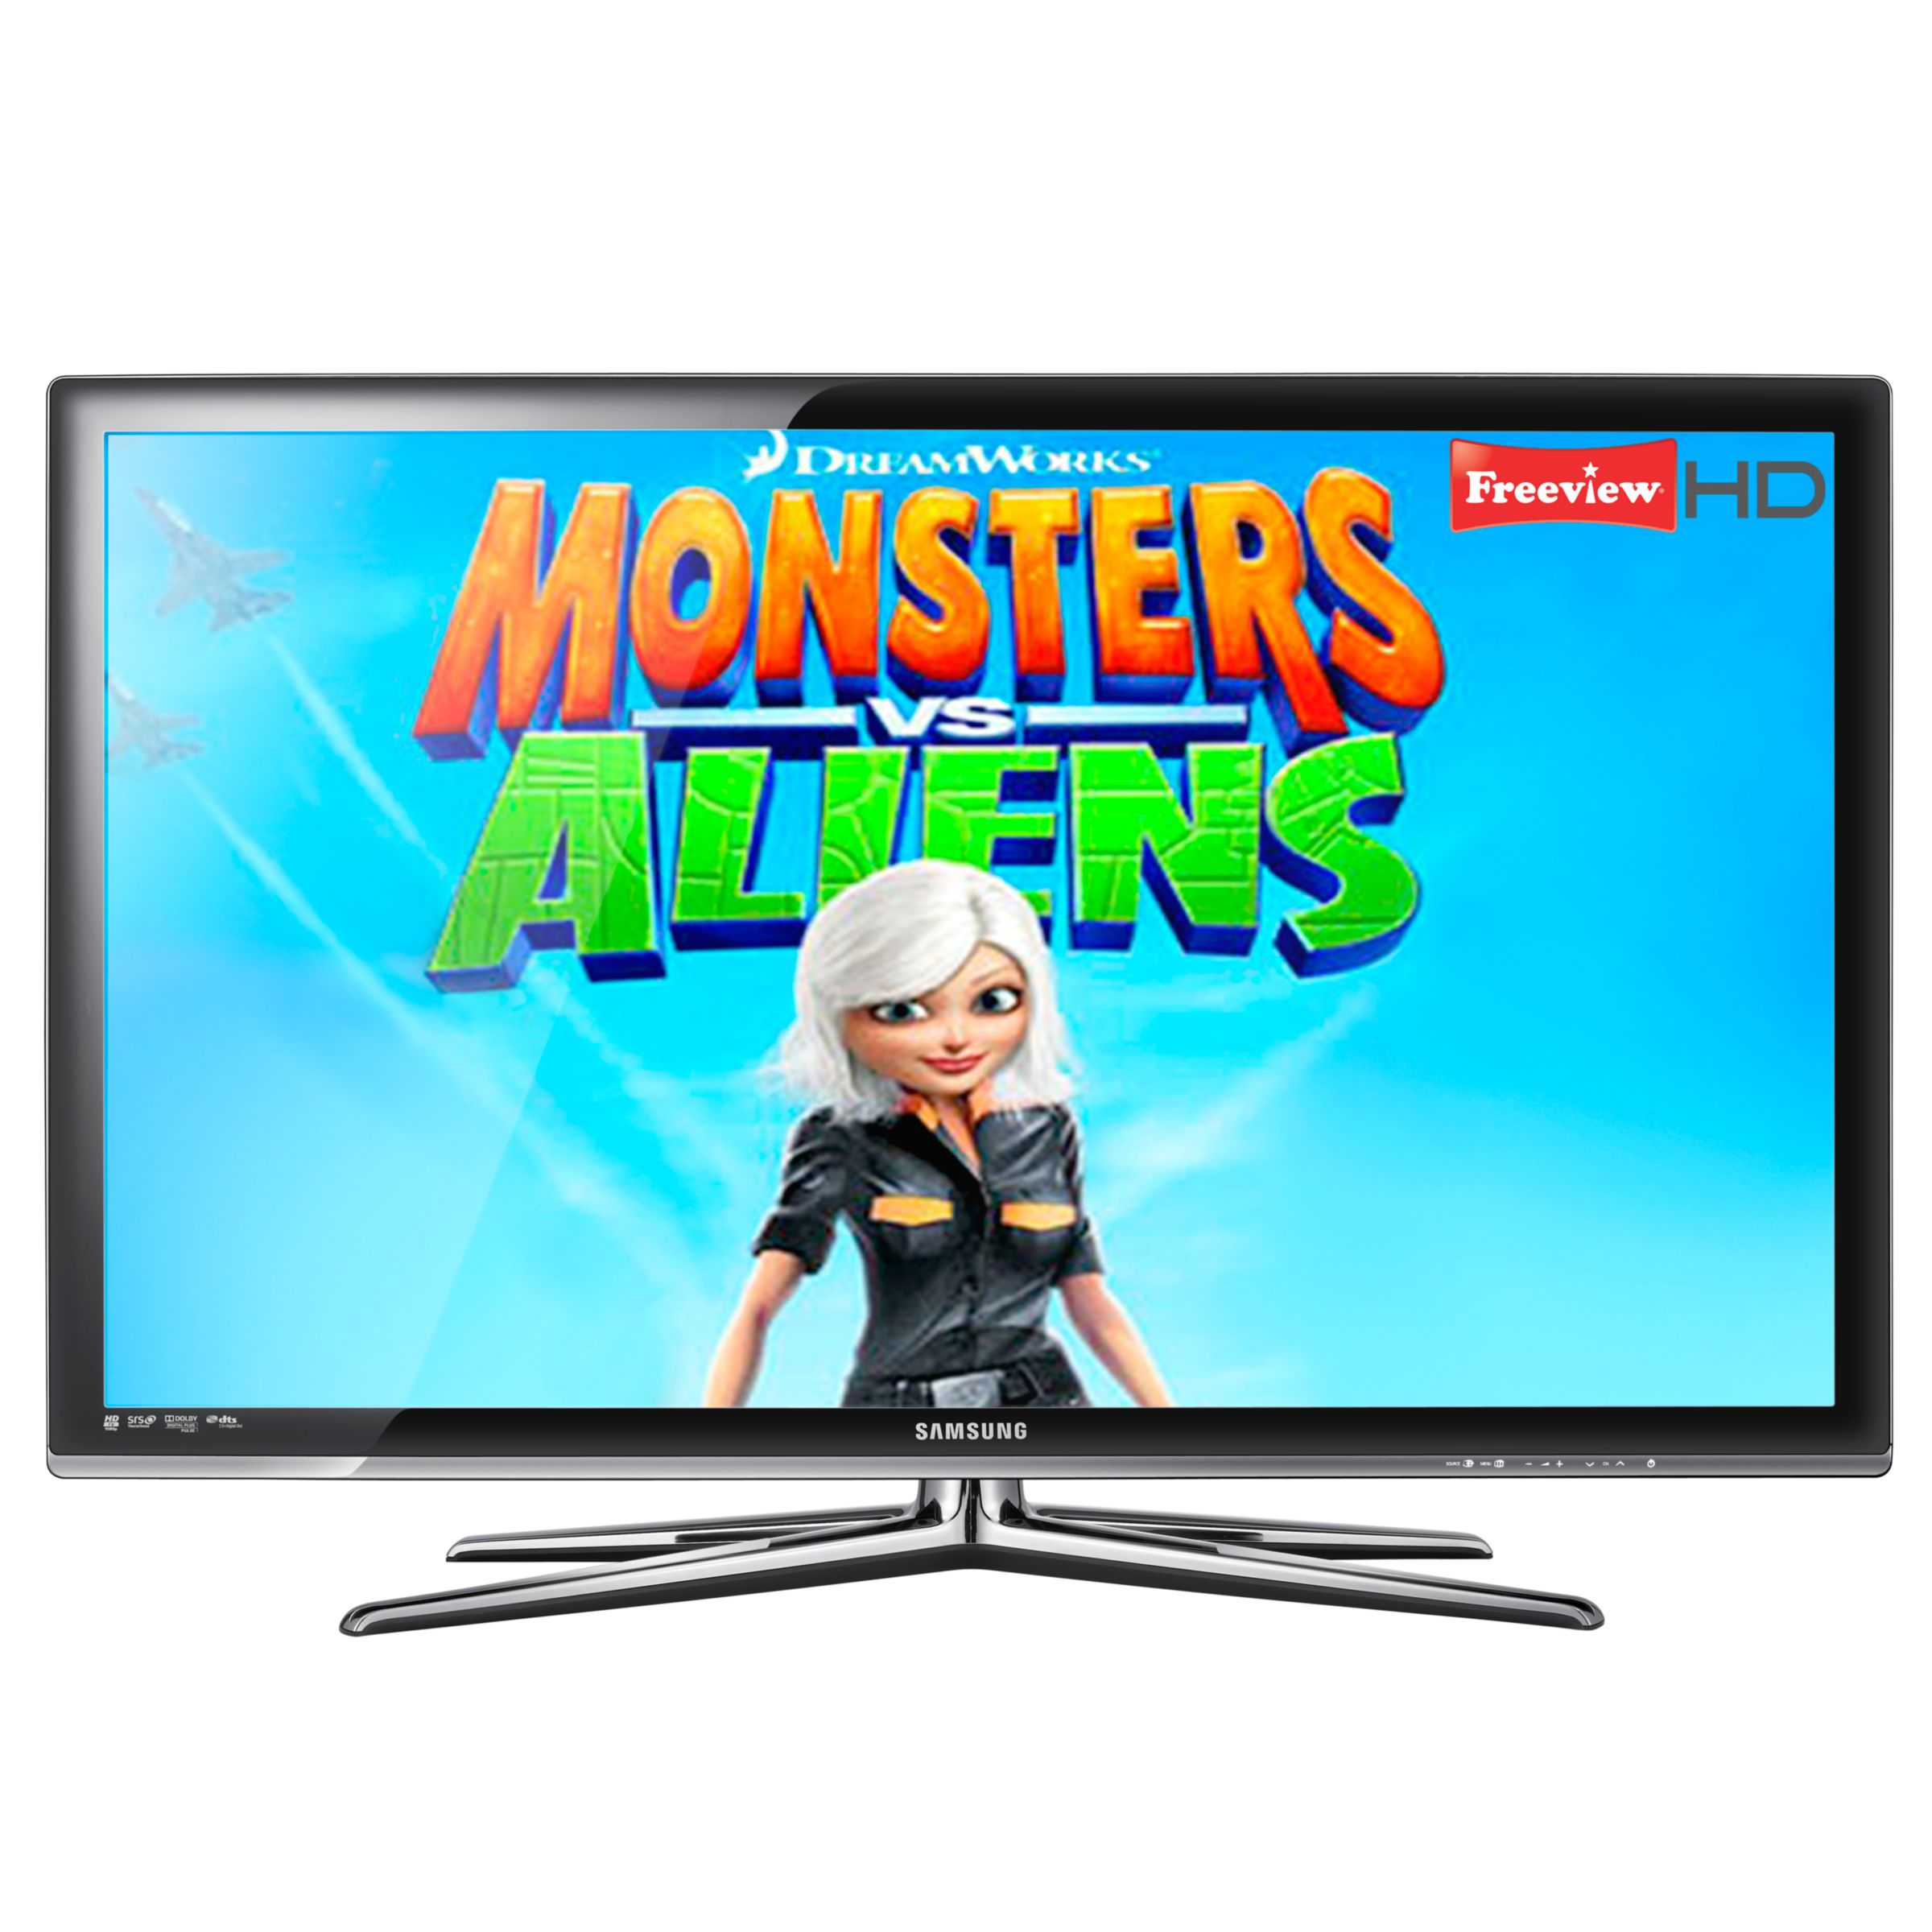 Samsung UE40C7000 LED HD 1080p 3D Television, 40 Inch with Built-in Freeview HD at JohnLewis